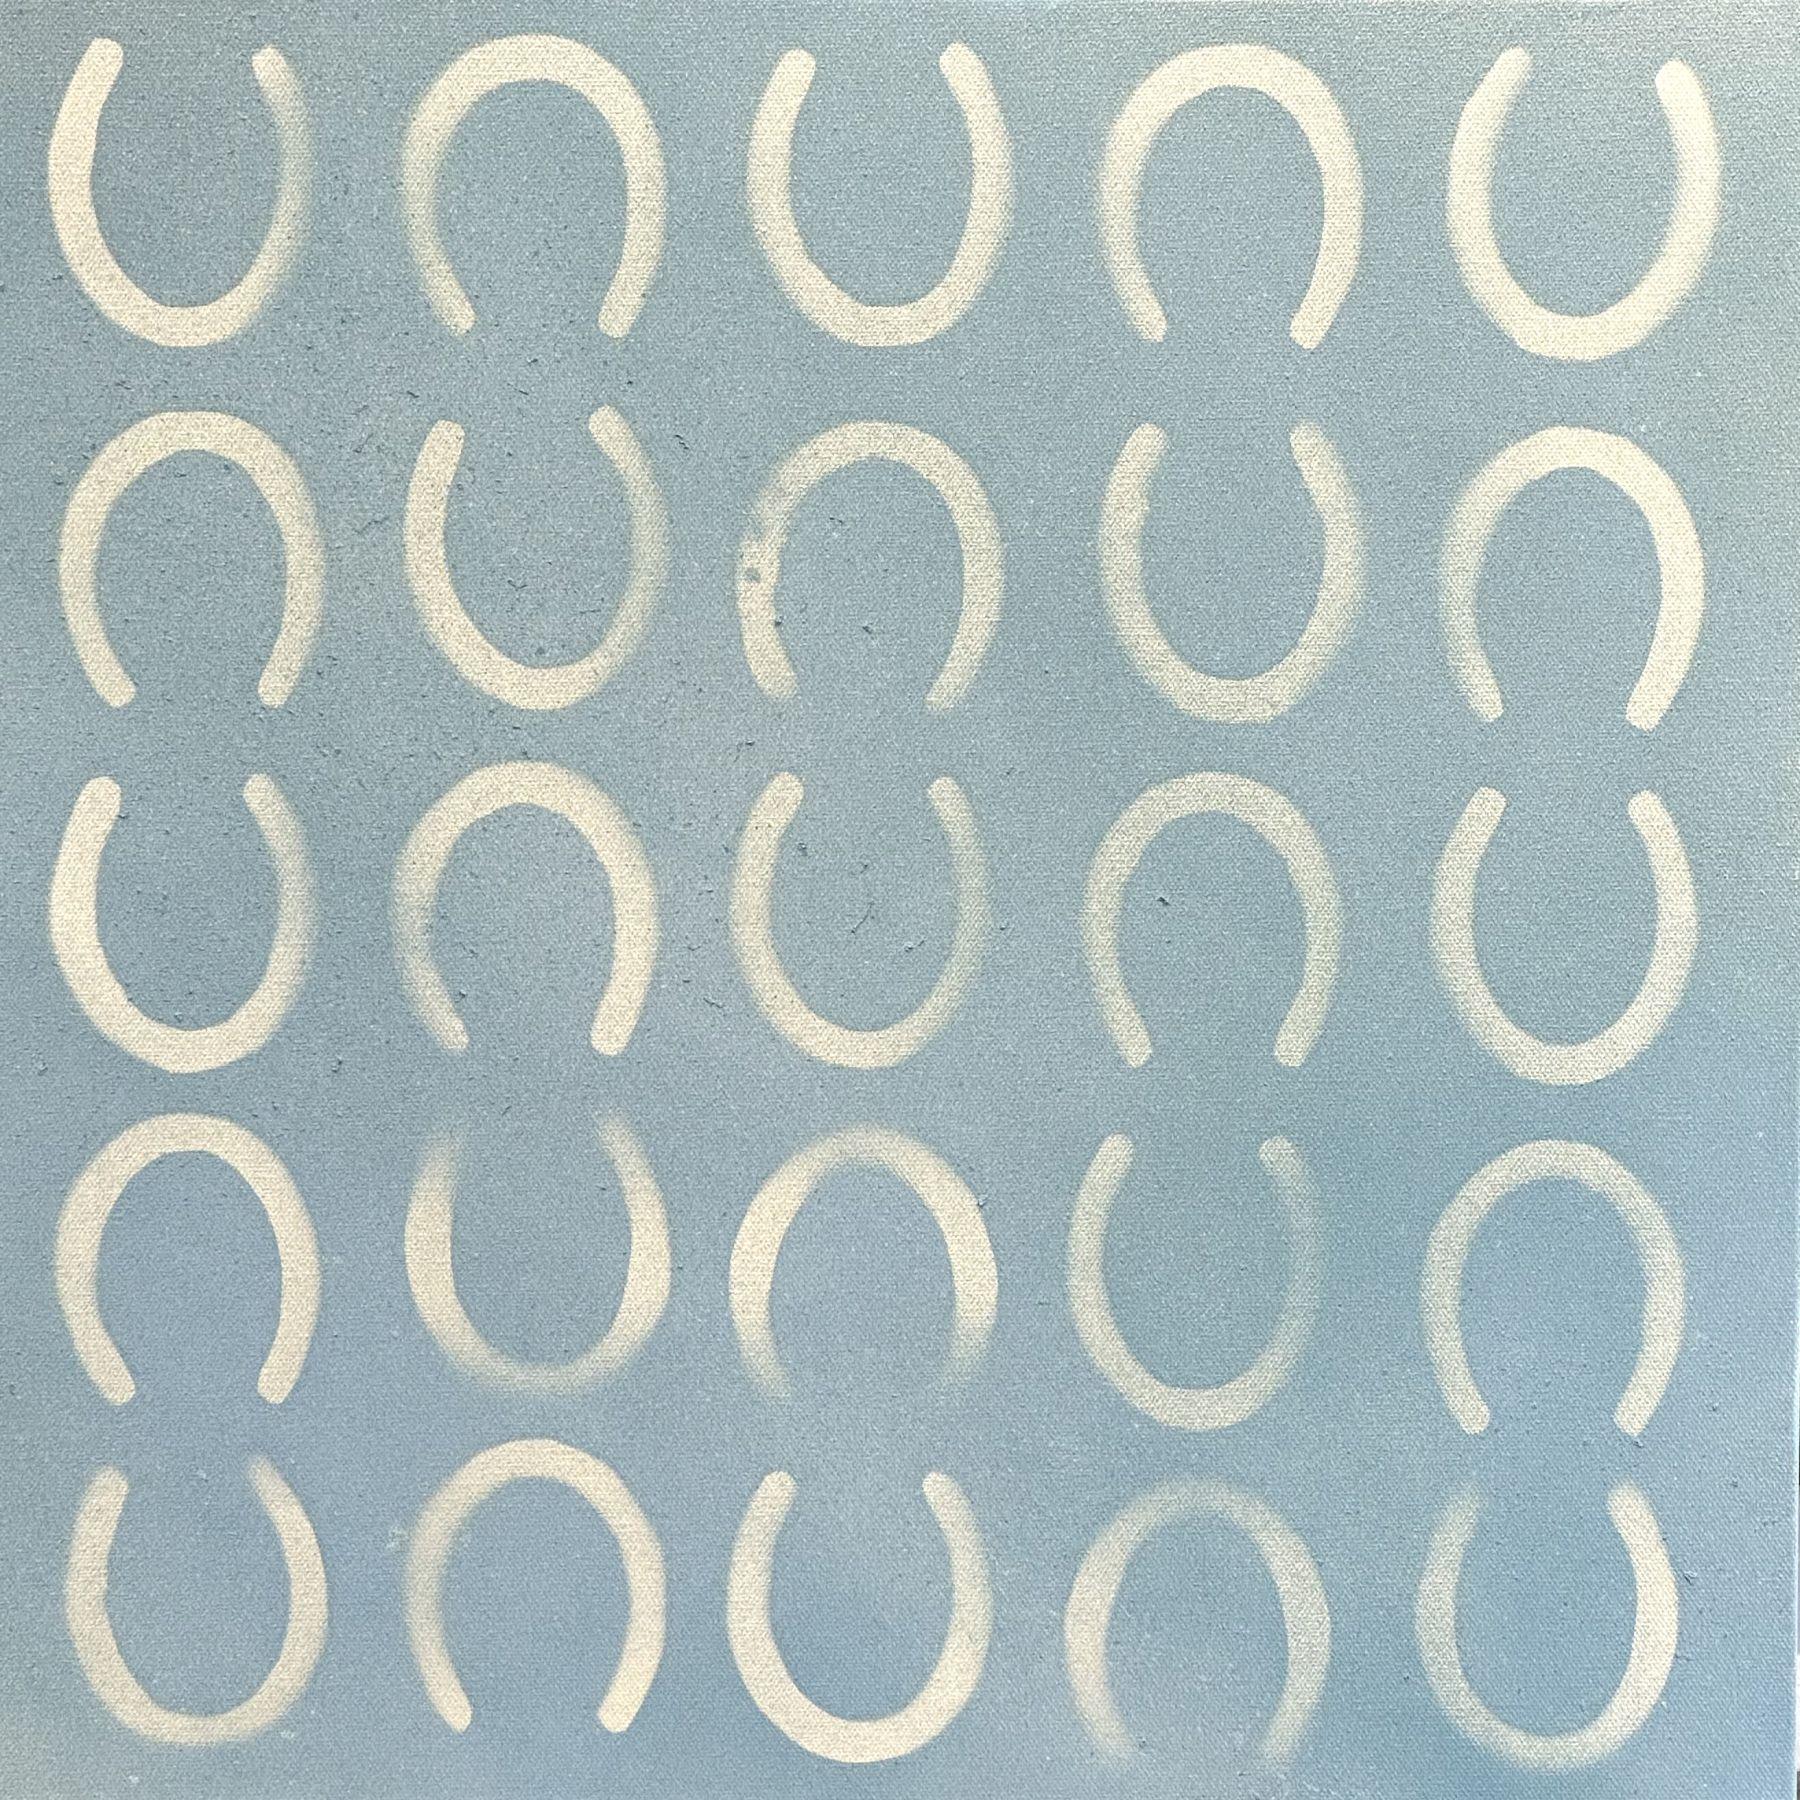 Matthew Jay Russell, "Racing Feet I" 20x20 Abstract Horseshoe Painting on Canvas